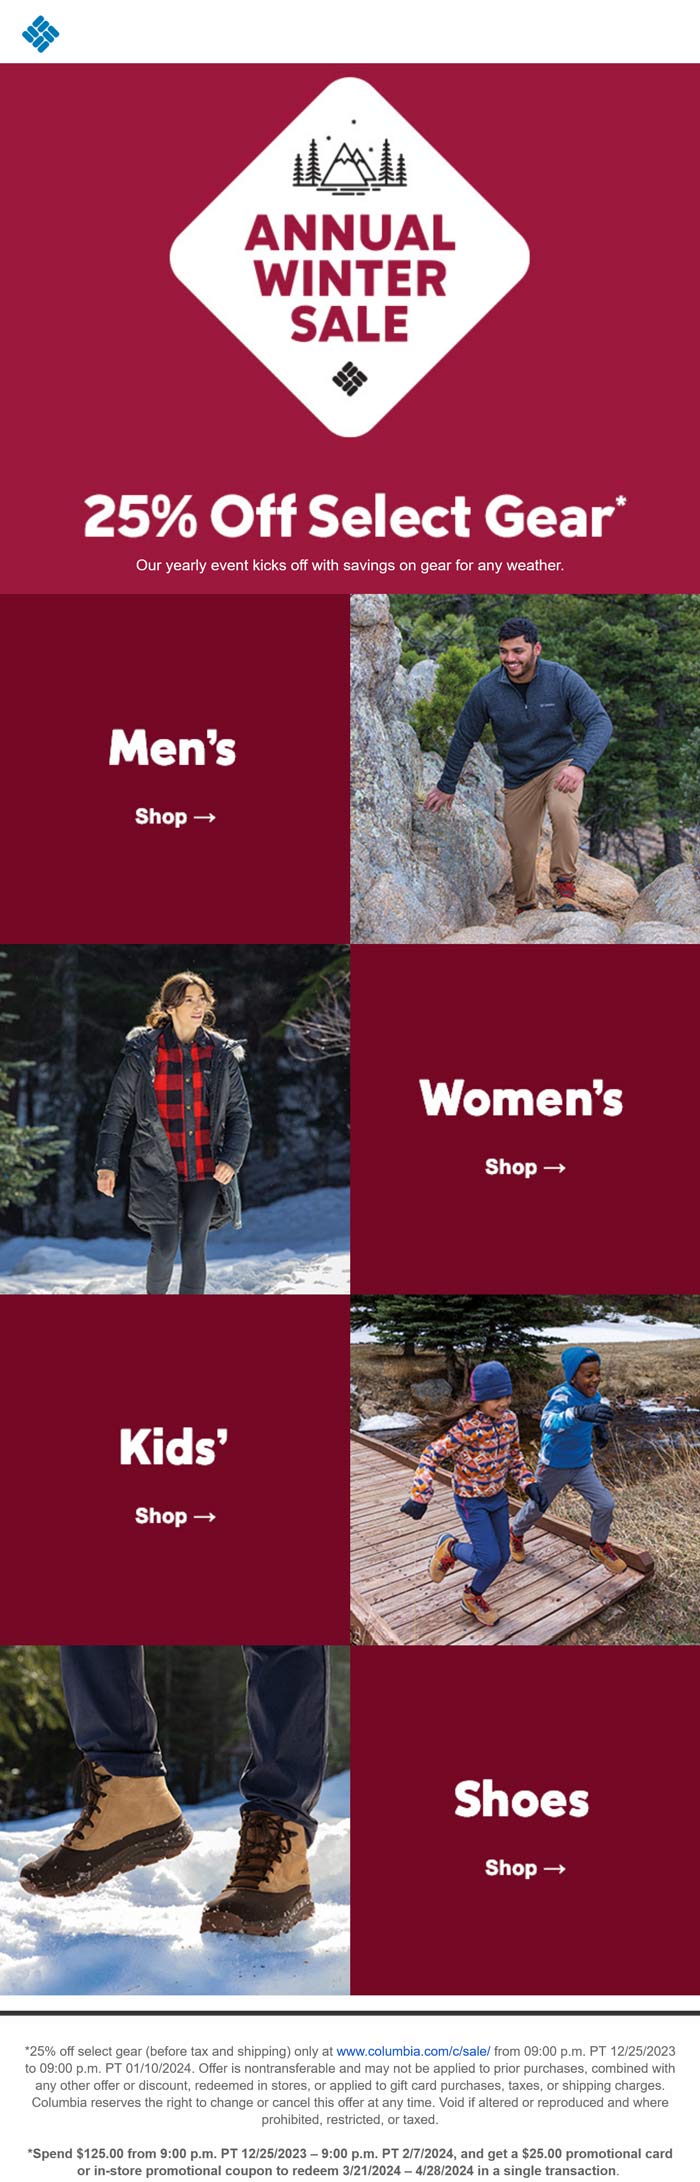 25% off various gear + $25 card on $125 spent online at Columbia #columbia